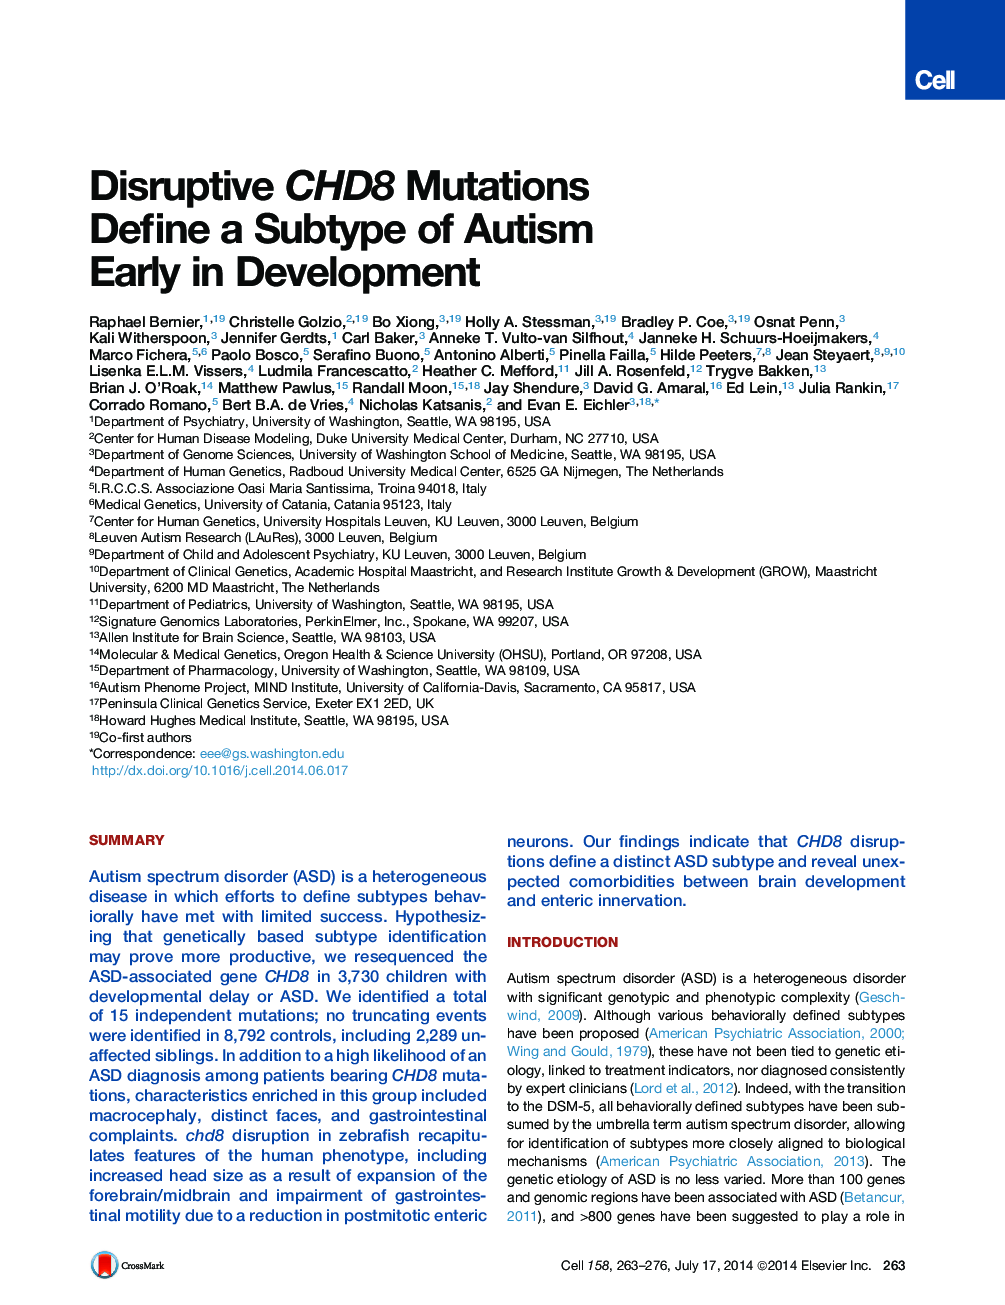 Disruptive CHD8 Mutations Define a Subtype of Autism Early in Development